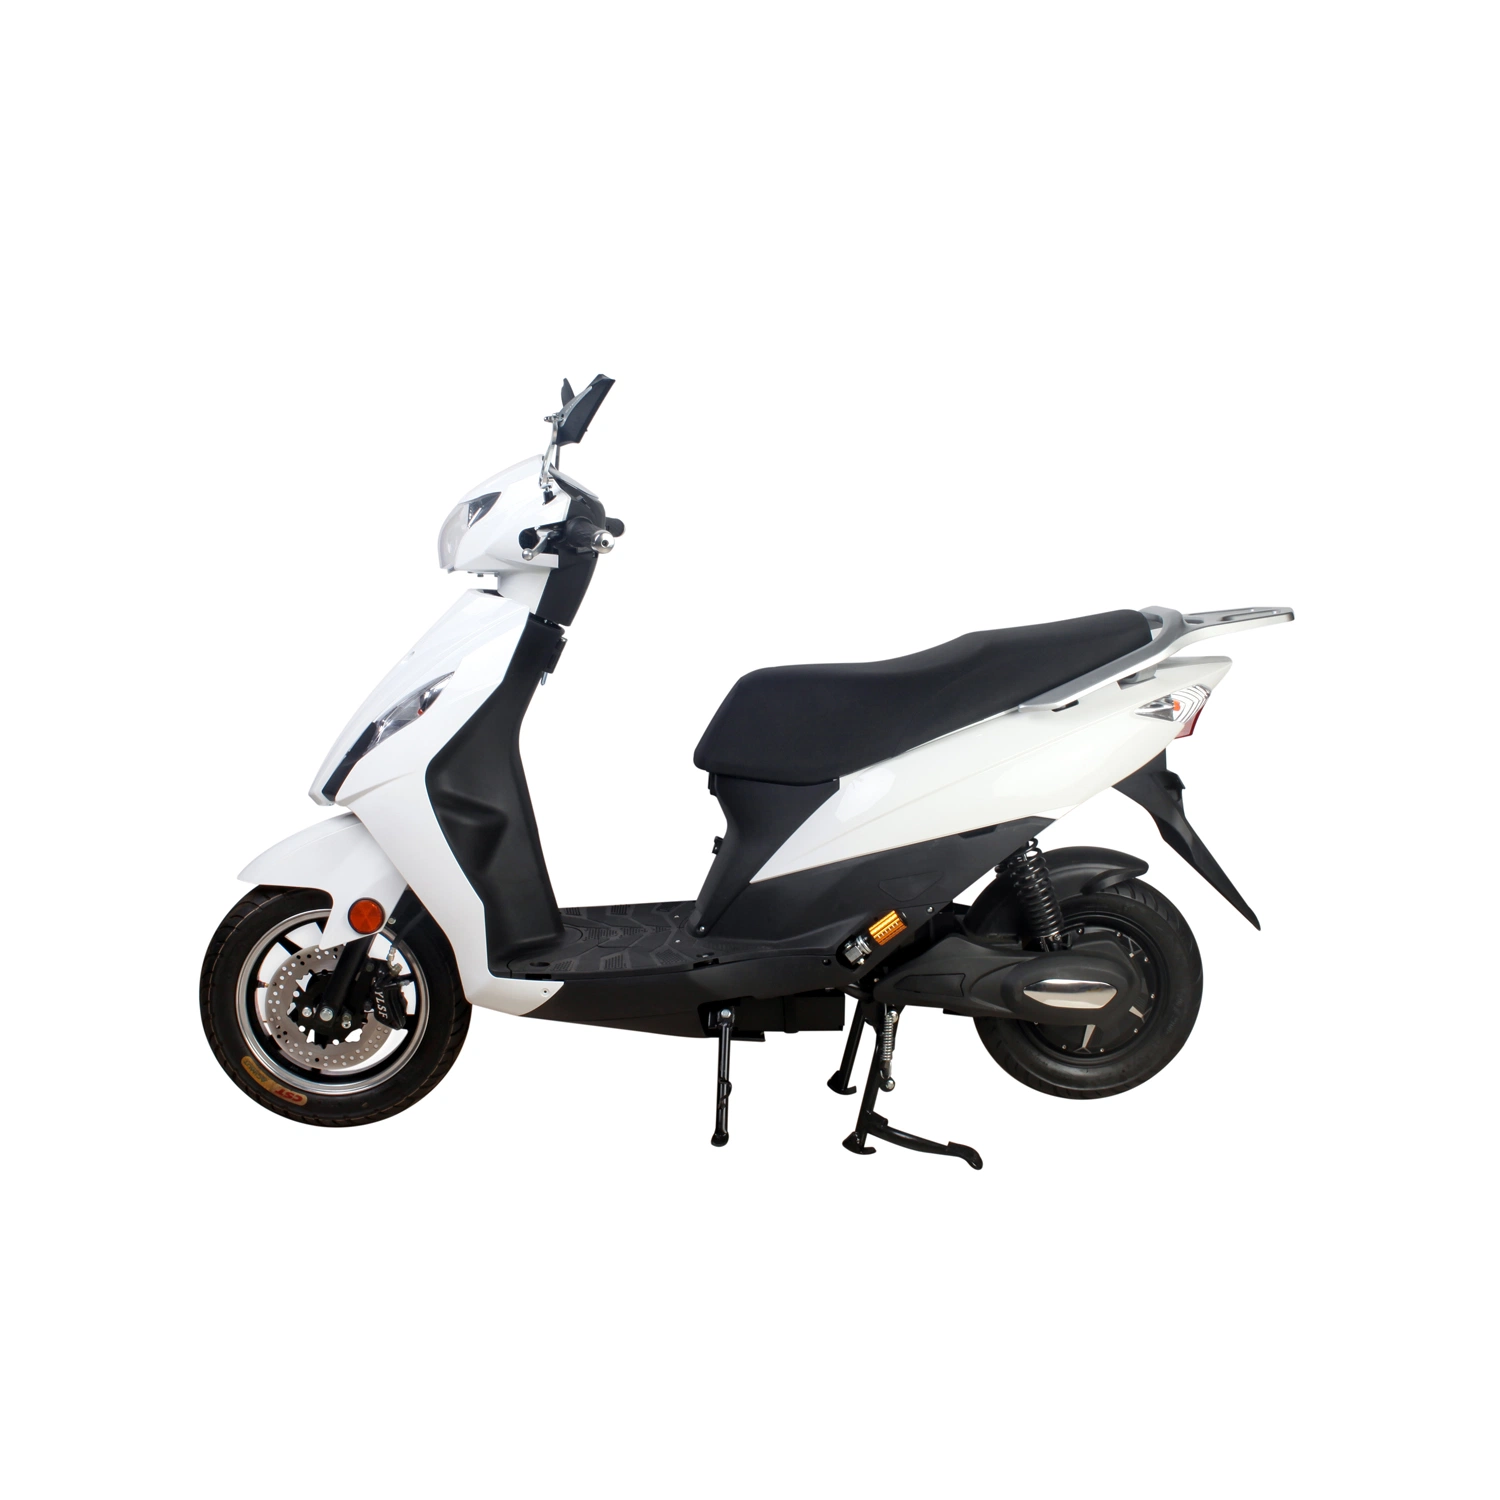 Two Person Seat 1000W Powerful Electrical Motorcycles Bicycles (YY)